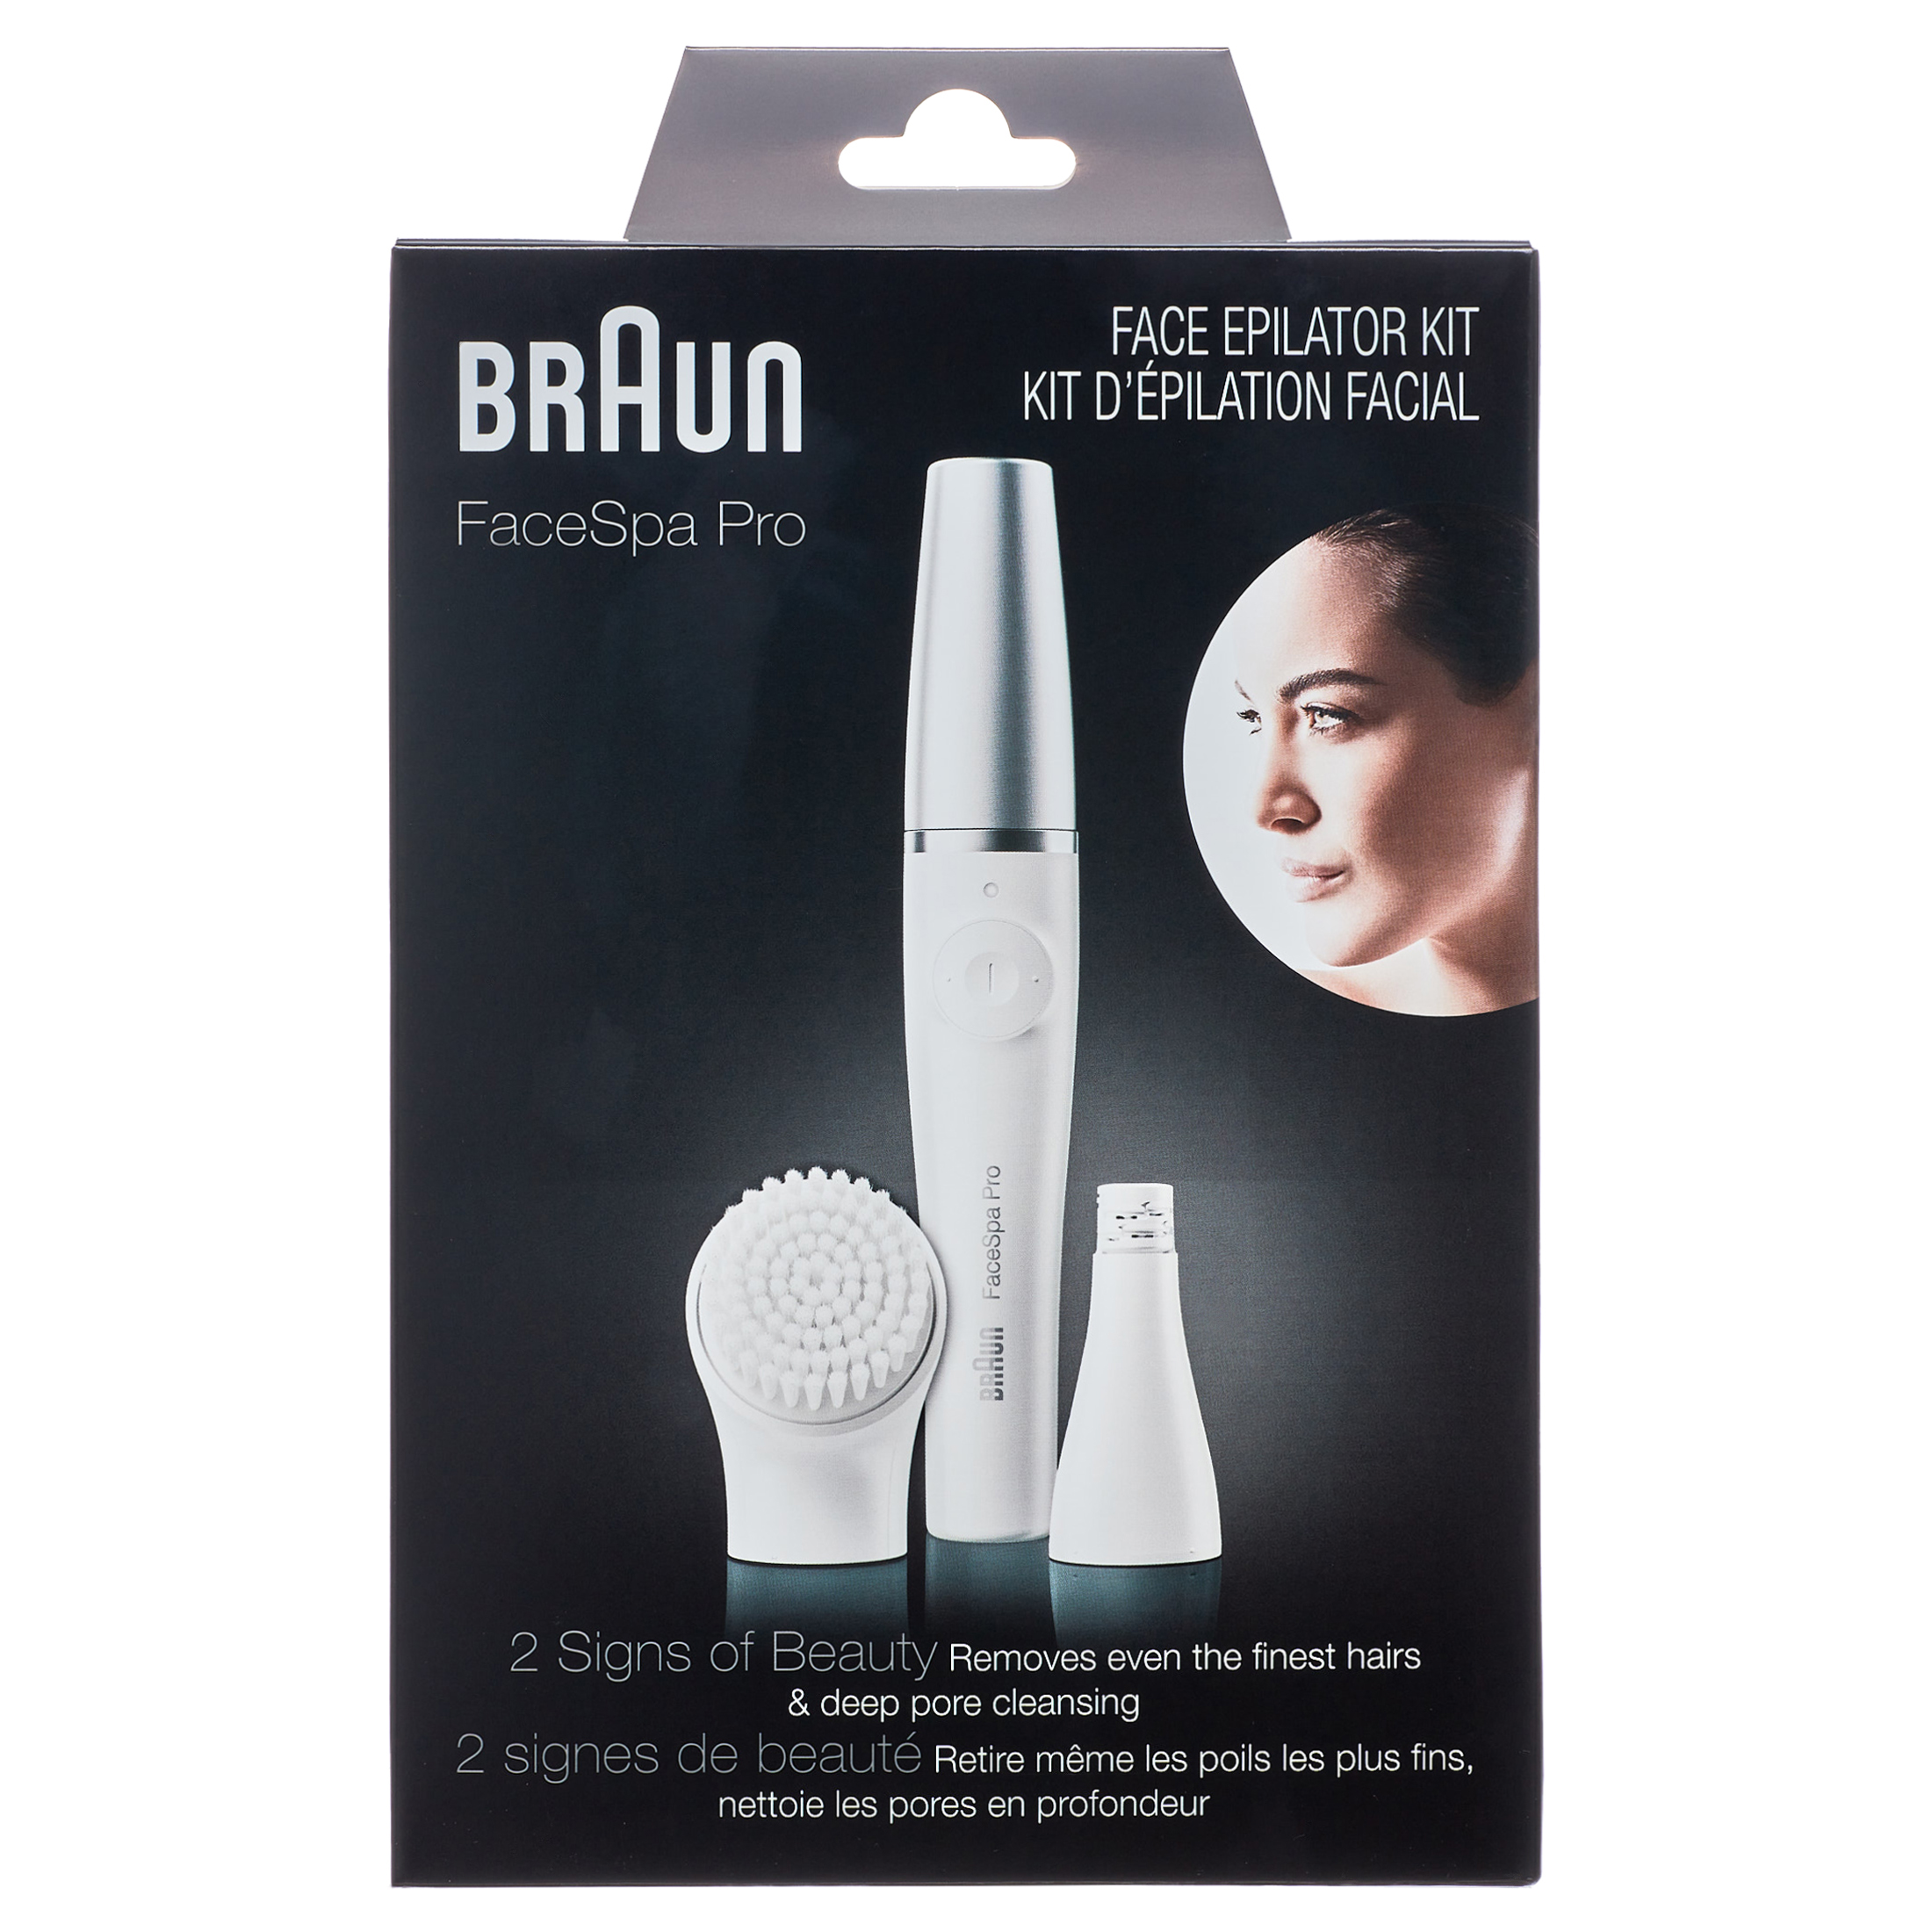 Braun FaceSpa Pro 910 Facial Epilator for Women with 1 Extra, White/Silver - image 1 of 13